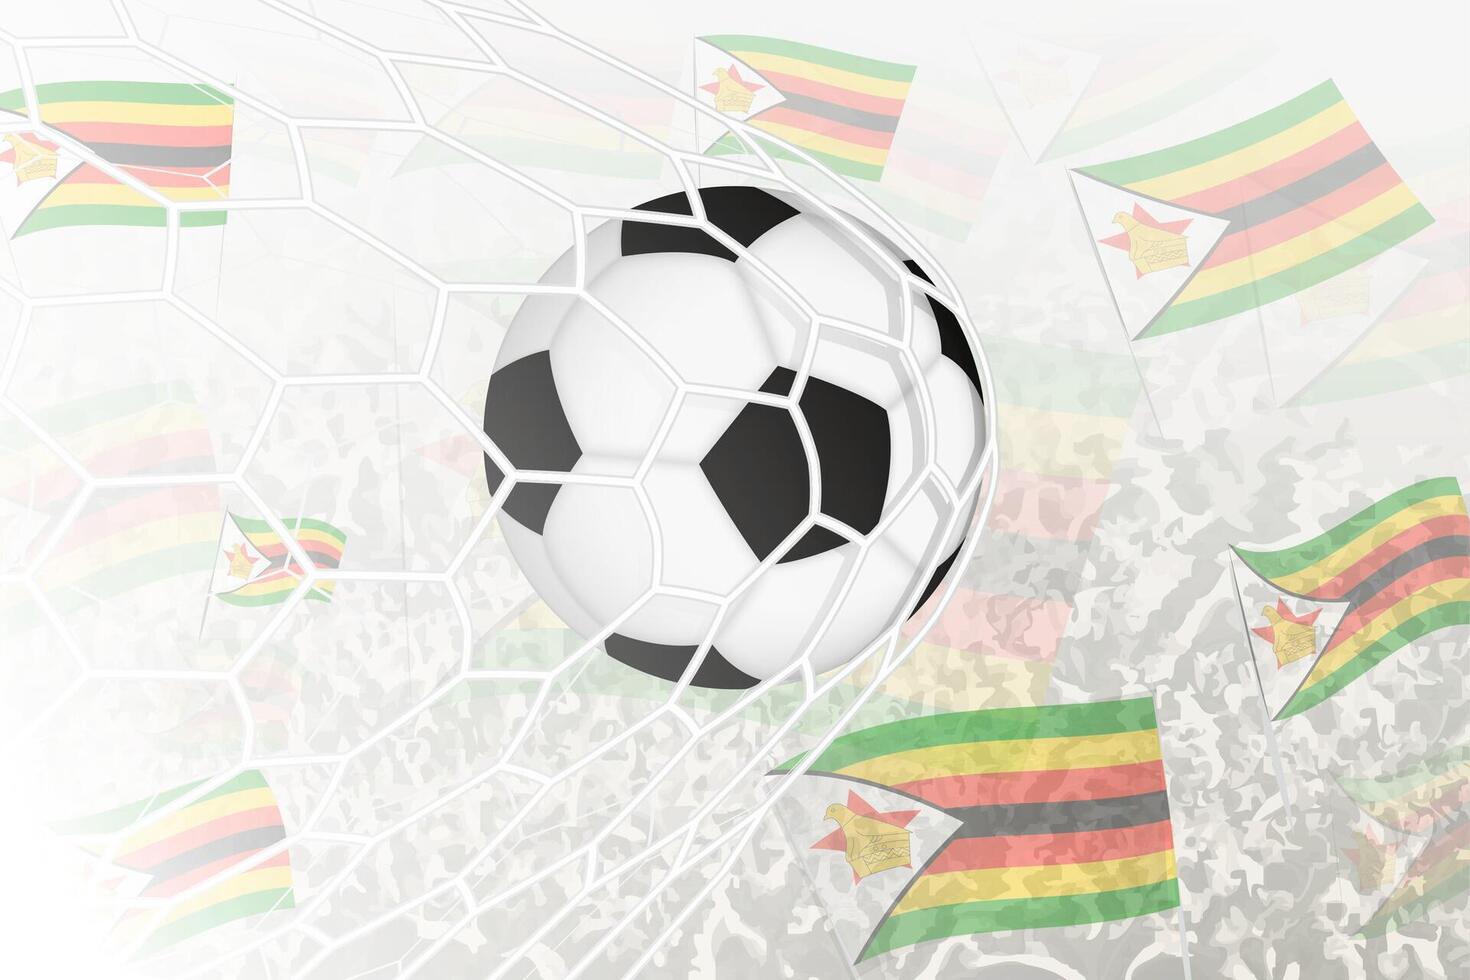 National Football team of Zimbabwe scored goal. Ball in goal net, while football supporters are waving the Zimbabwe flag in the background. vector